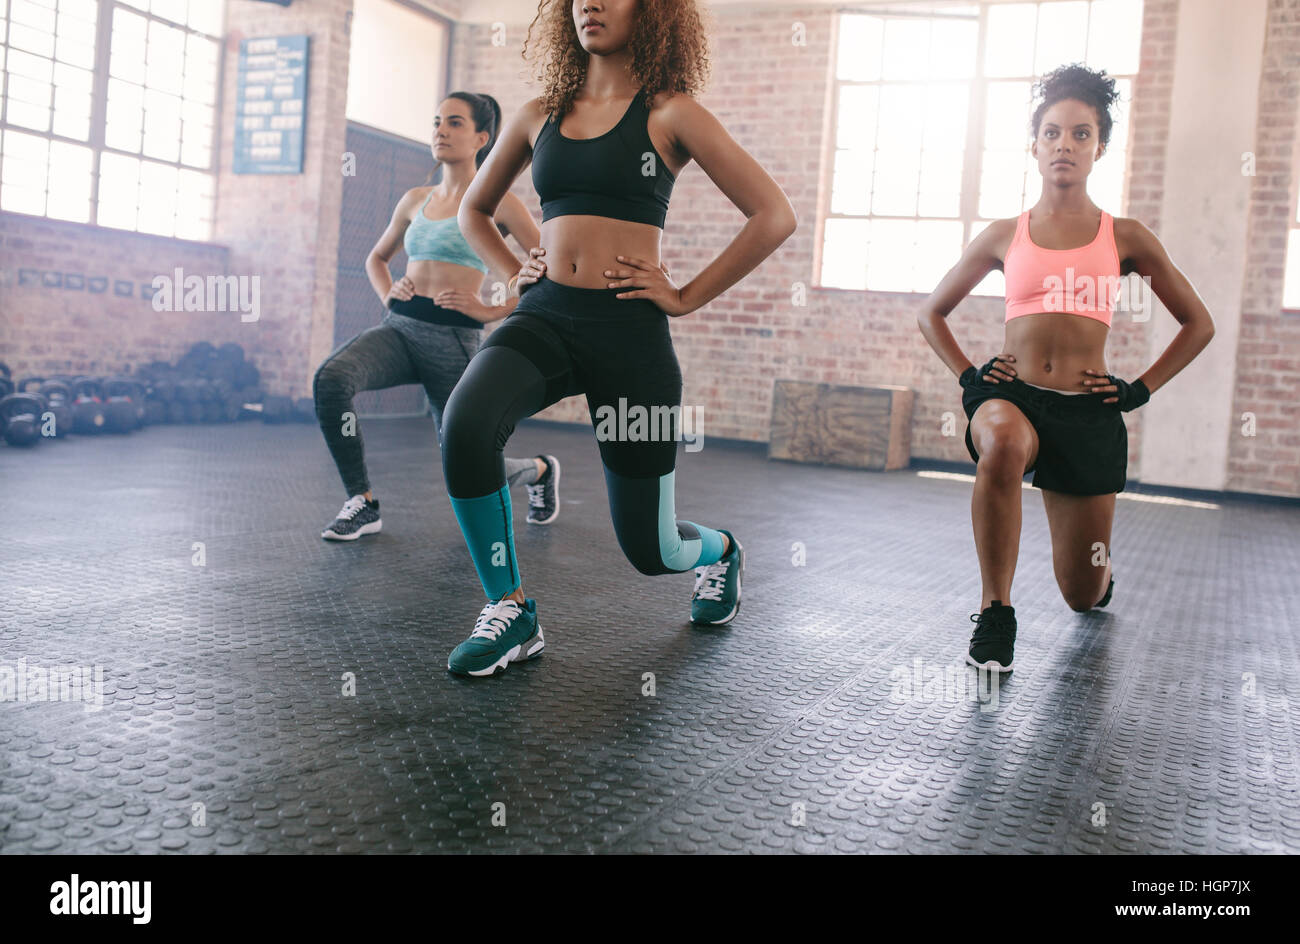 Portrait of three young women doing workout together in gym. Females exercising in fitness class. Stock Photo